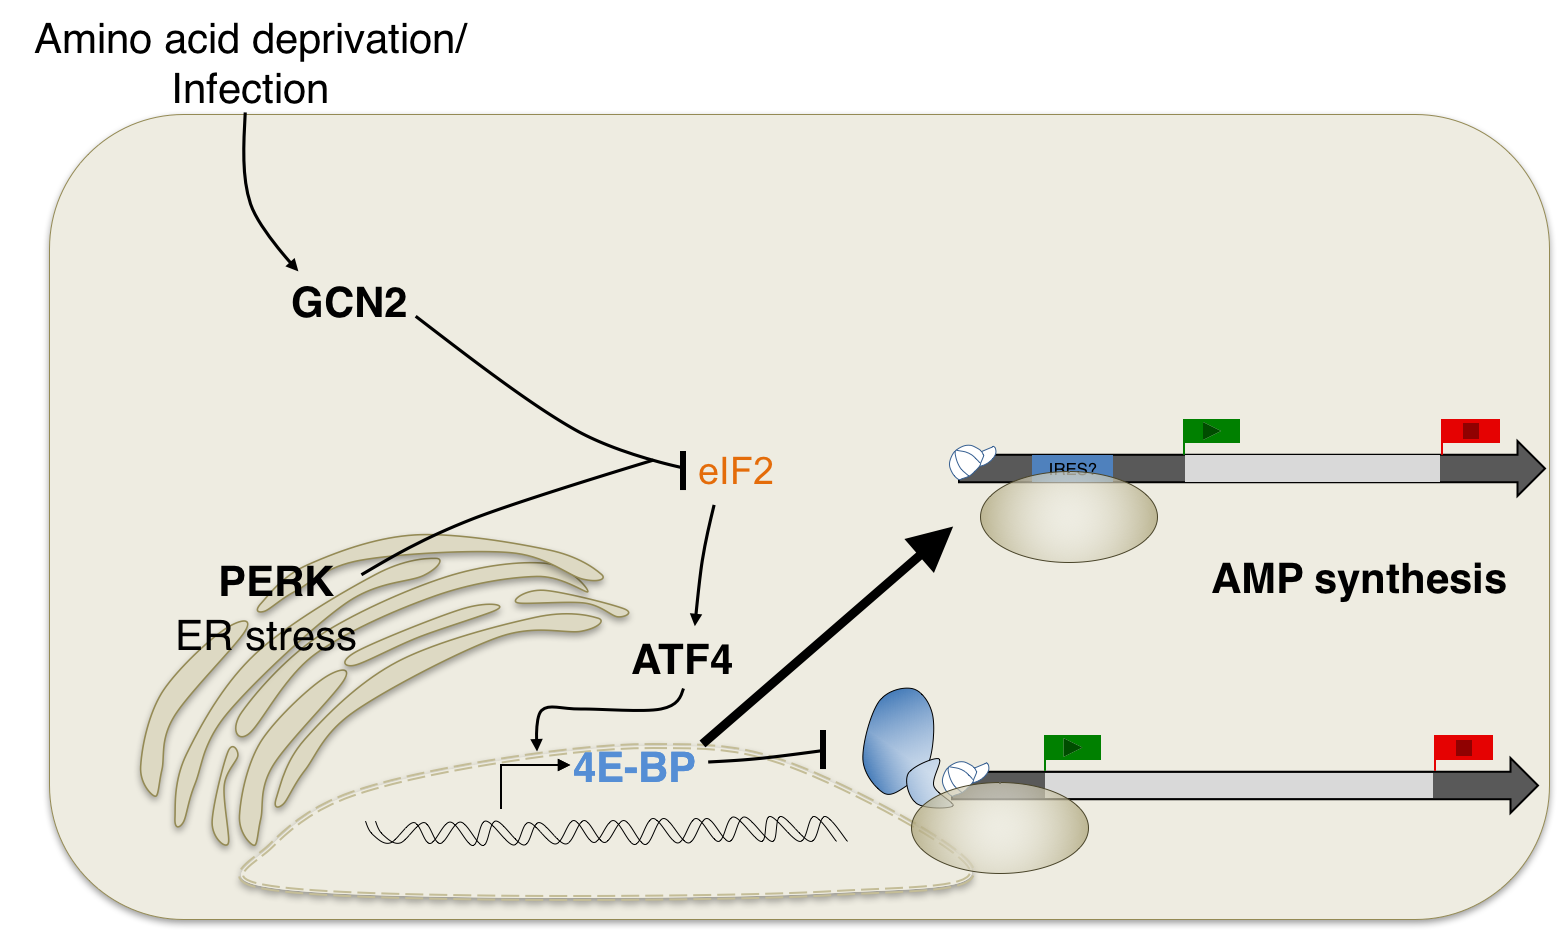  Stress response signaling and it’s downstream effects on mRNA translation. 